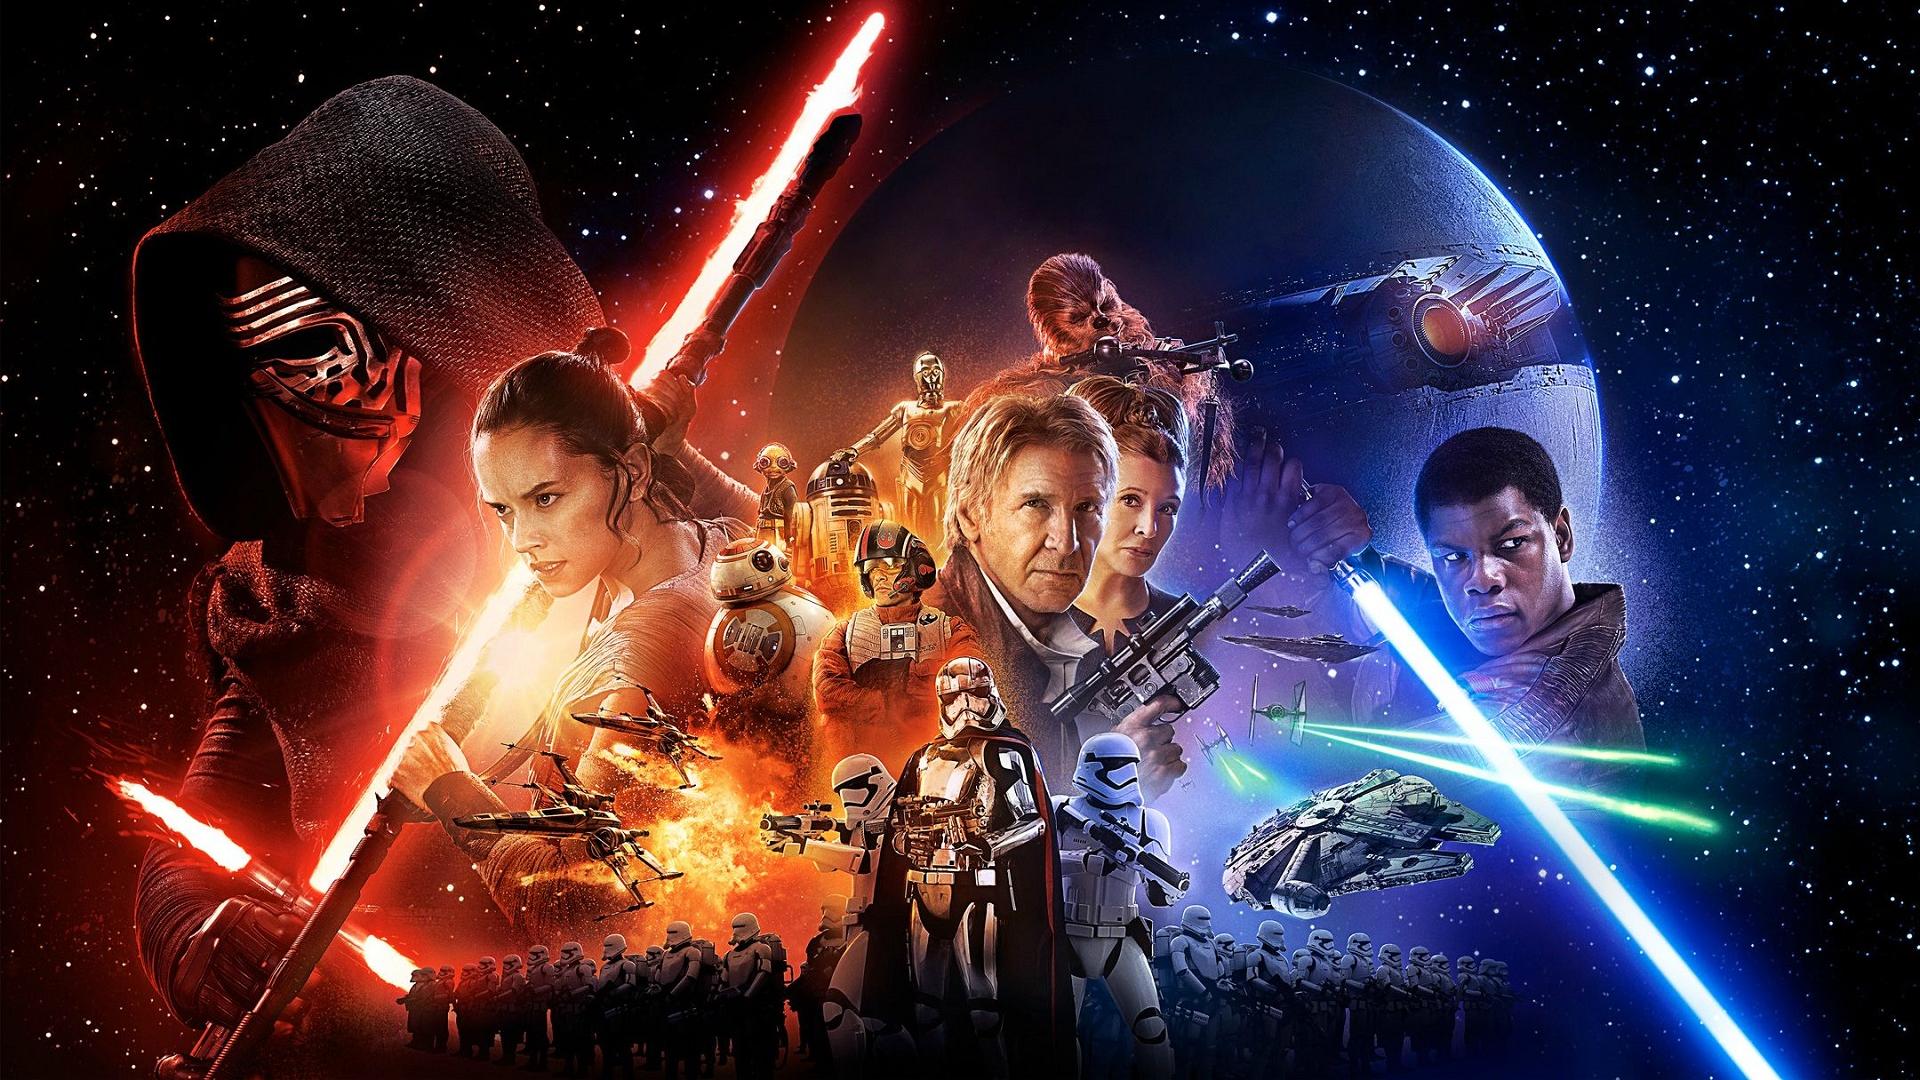 Star Wars - The Force Awakens Poster [1920 x 1080] : wallpapers